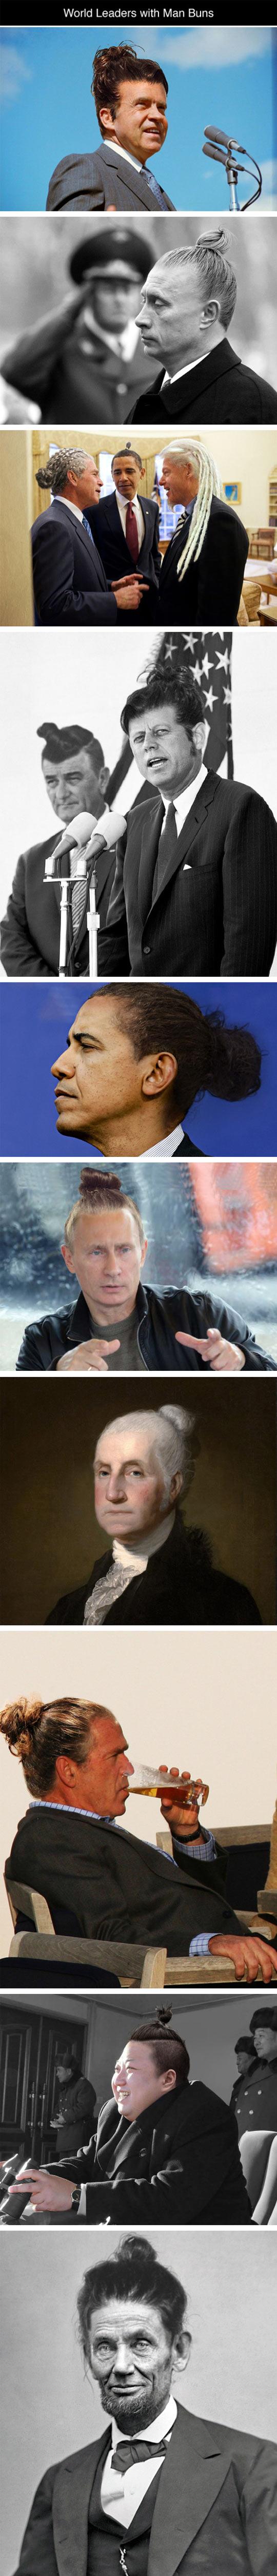 Leaders With Man Buns